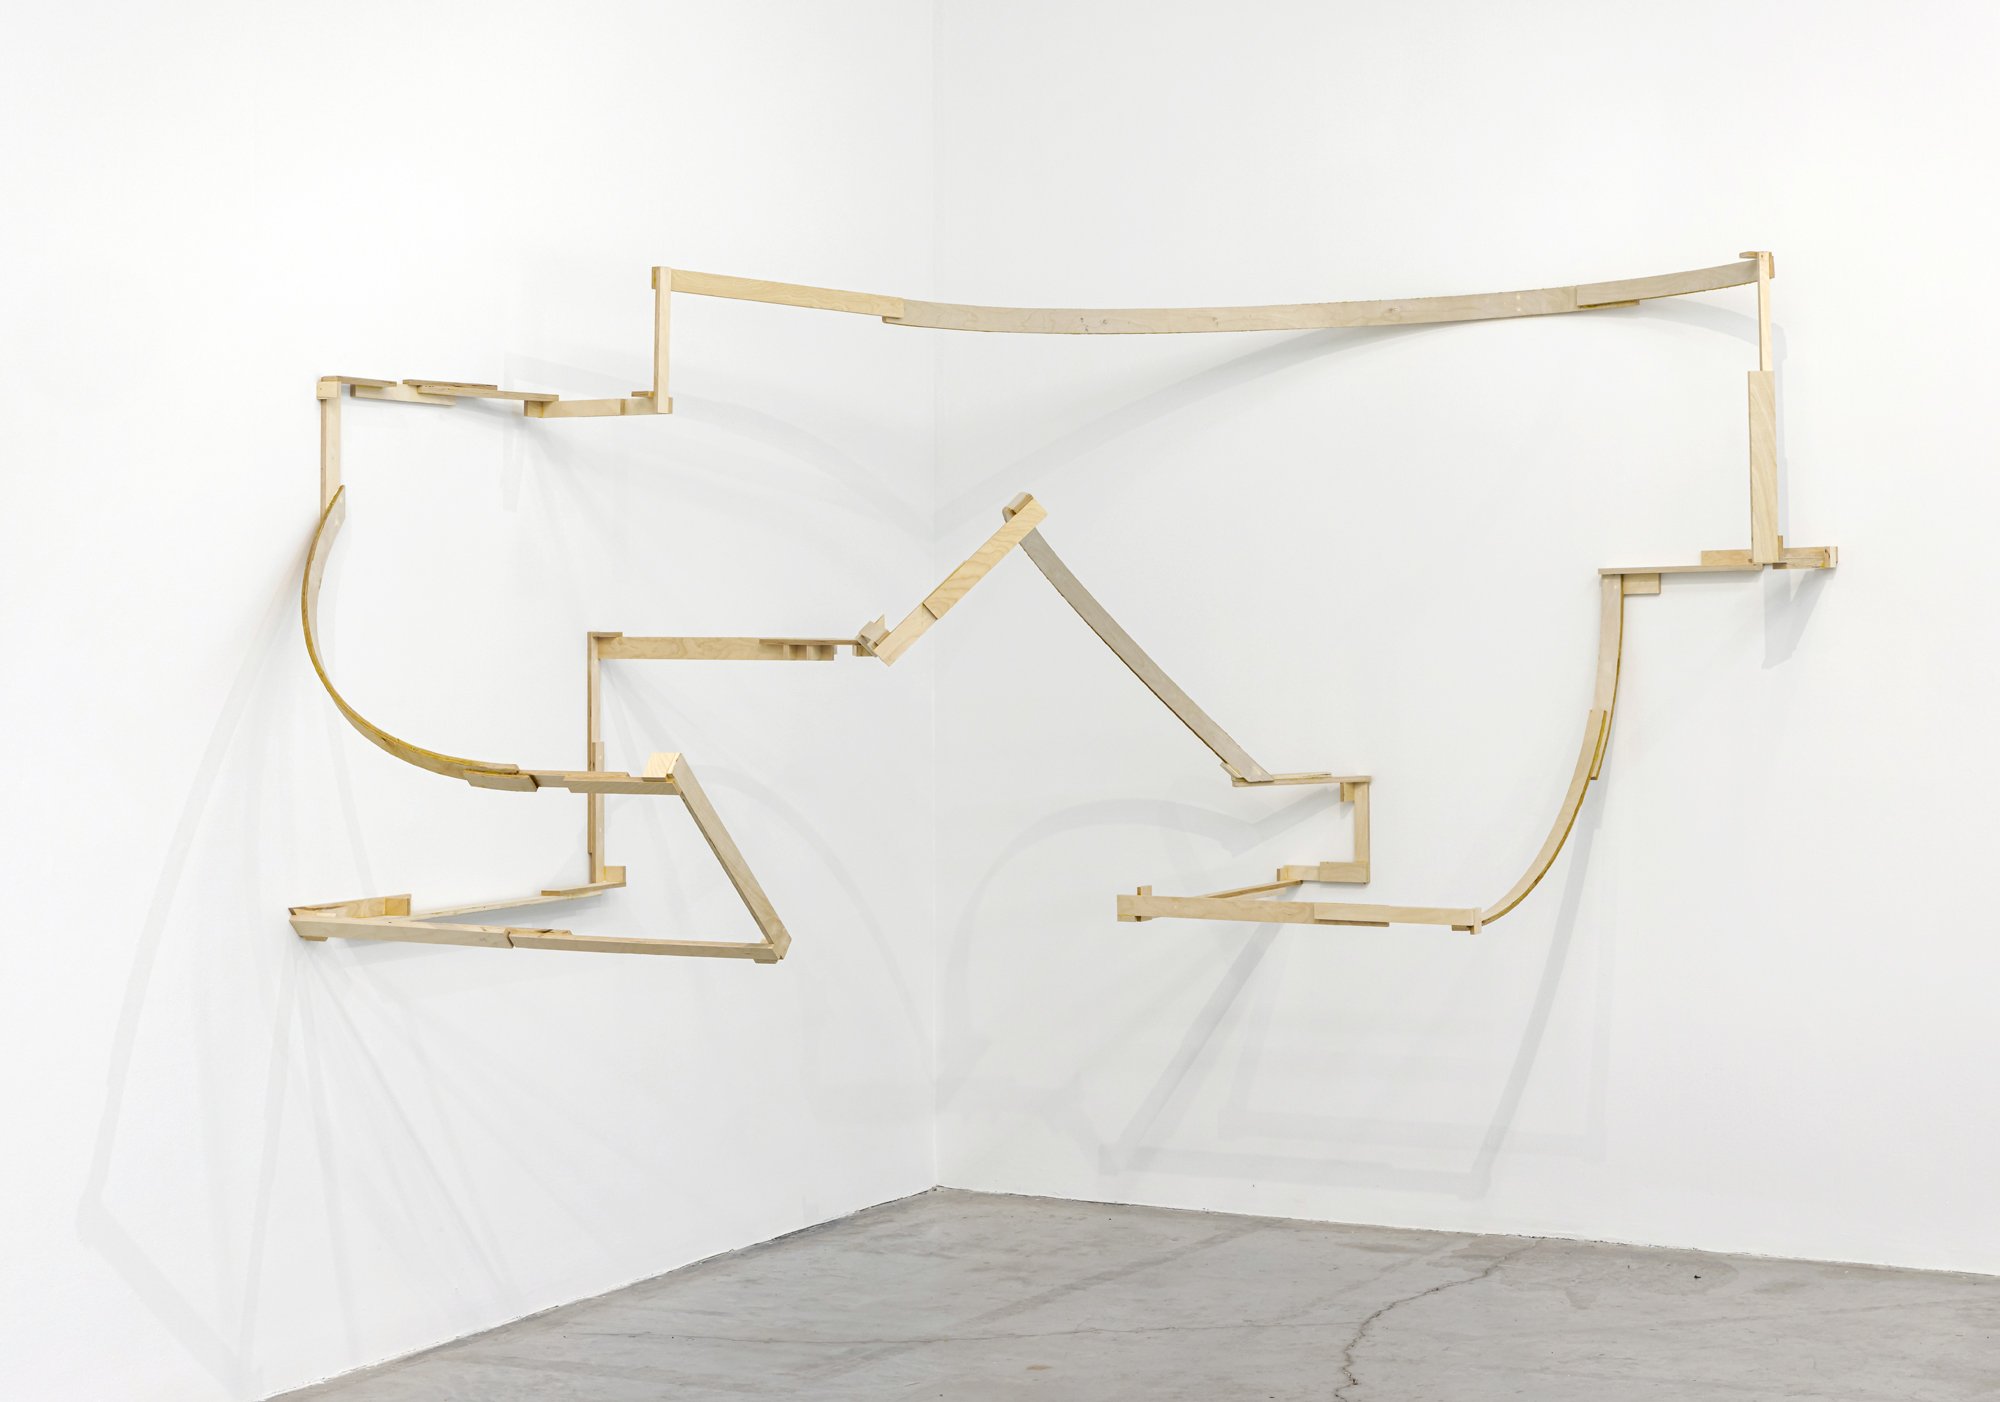   Outline 1 , 2023, site-specific installation, plywood and glue, 59 x 141 x 105 